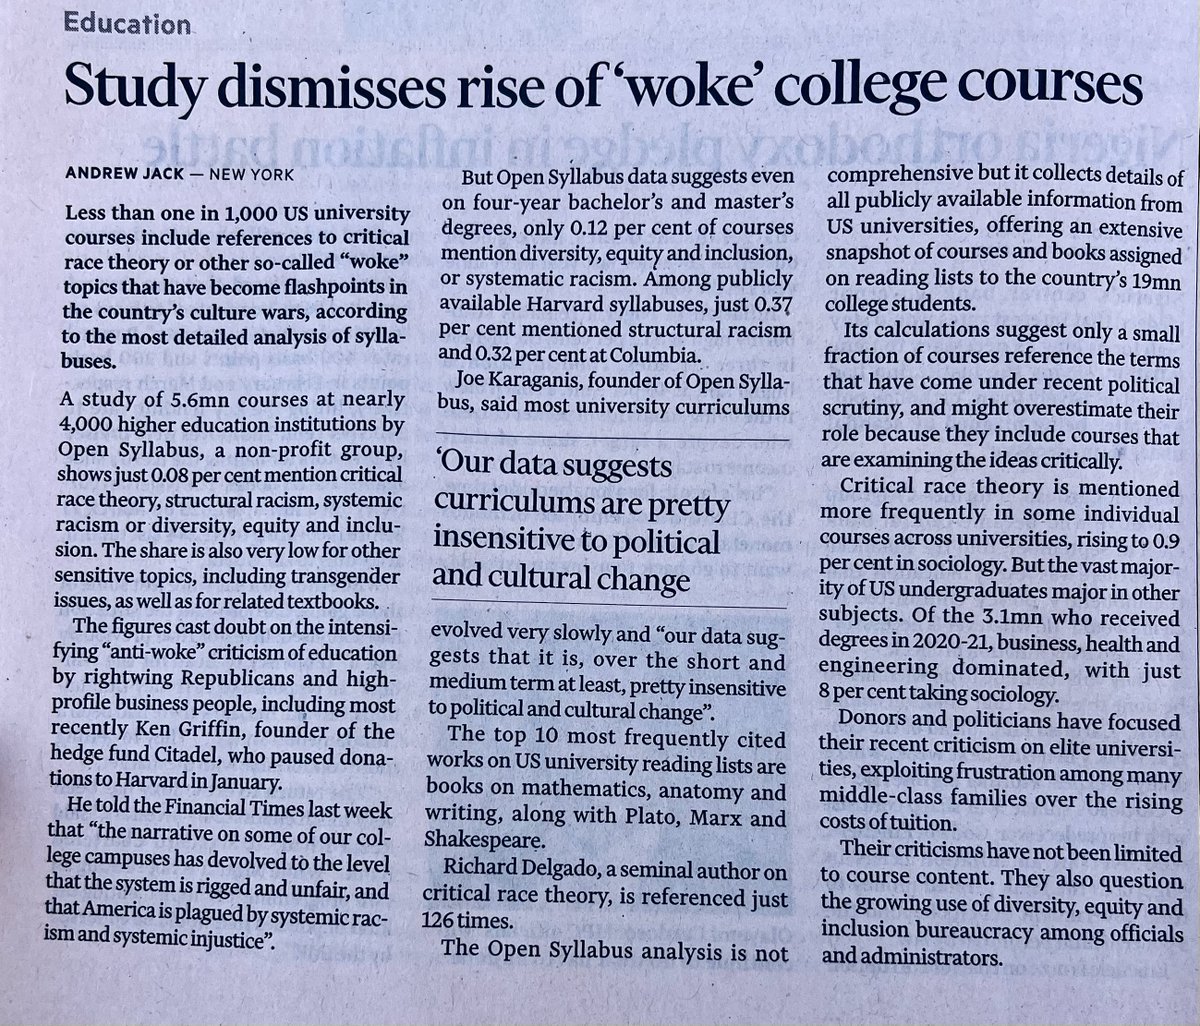 'A study of 5.6mn courses at nearly 4,000 higher education institutions shows just 0.08% mention critical race theory, structural racism, systemic racism or diversity, equity and inclusion.' ft.com/content/0f423c…